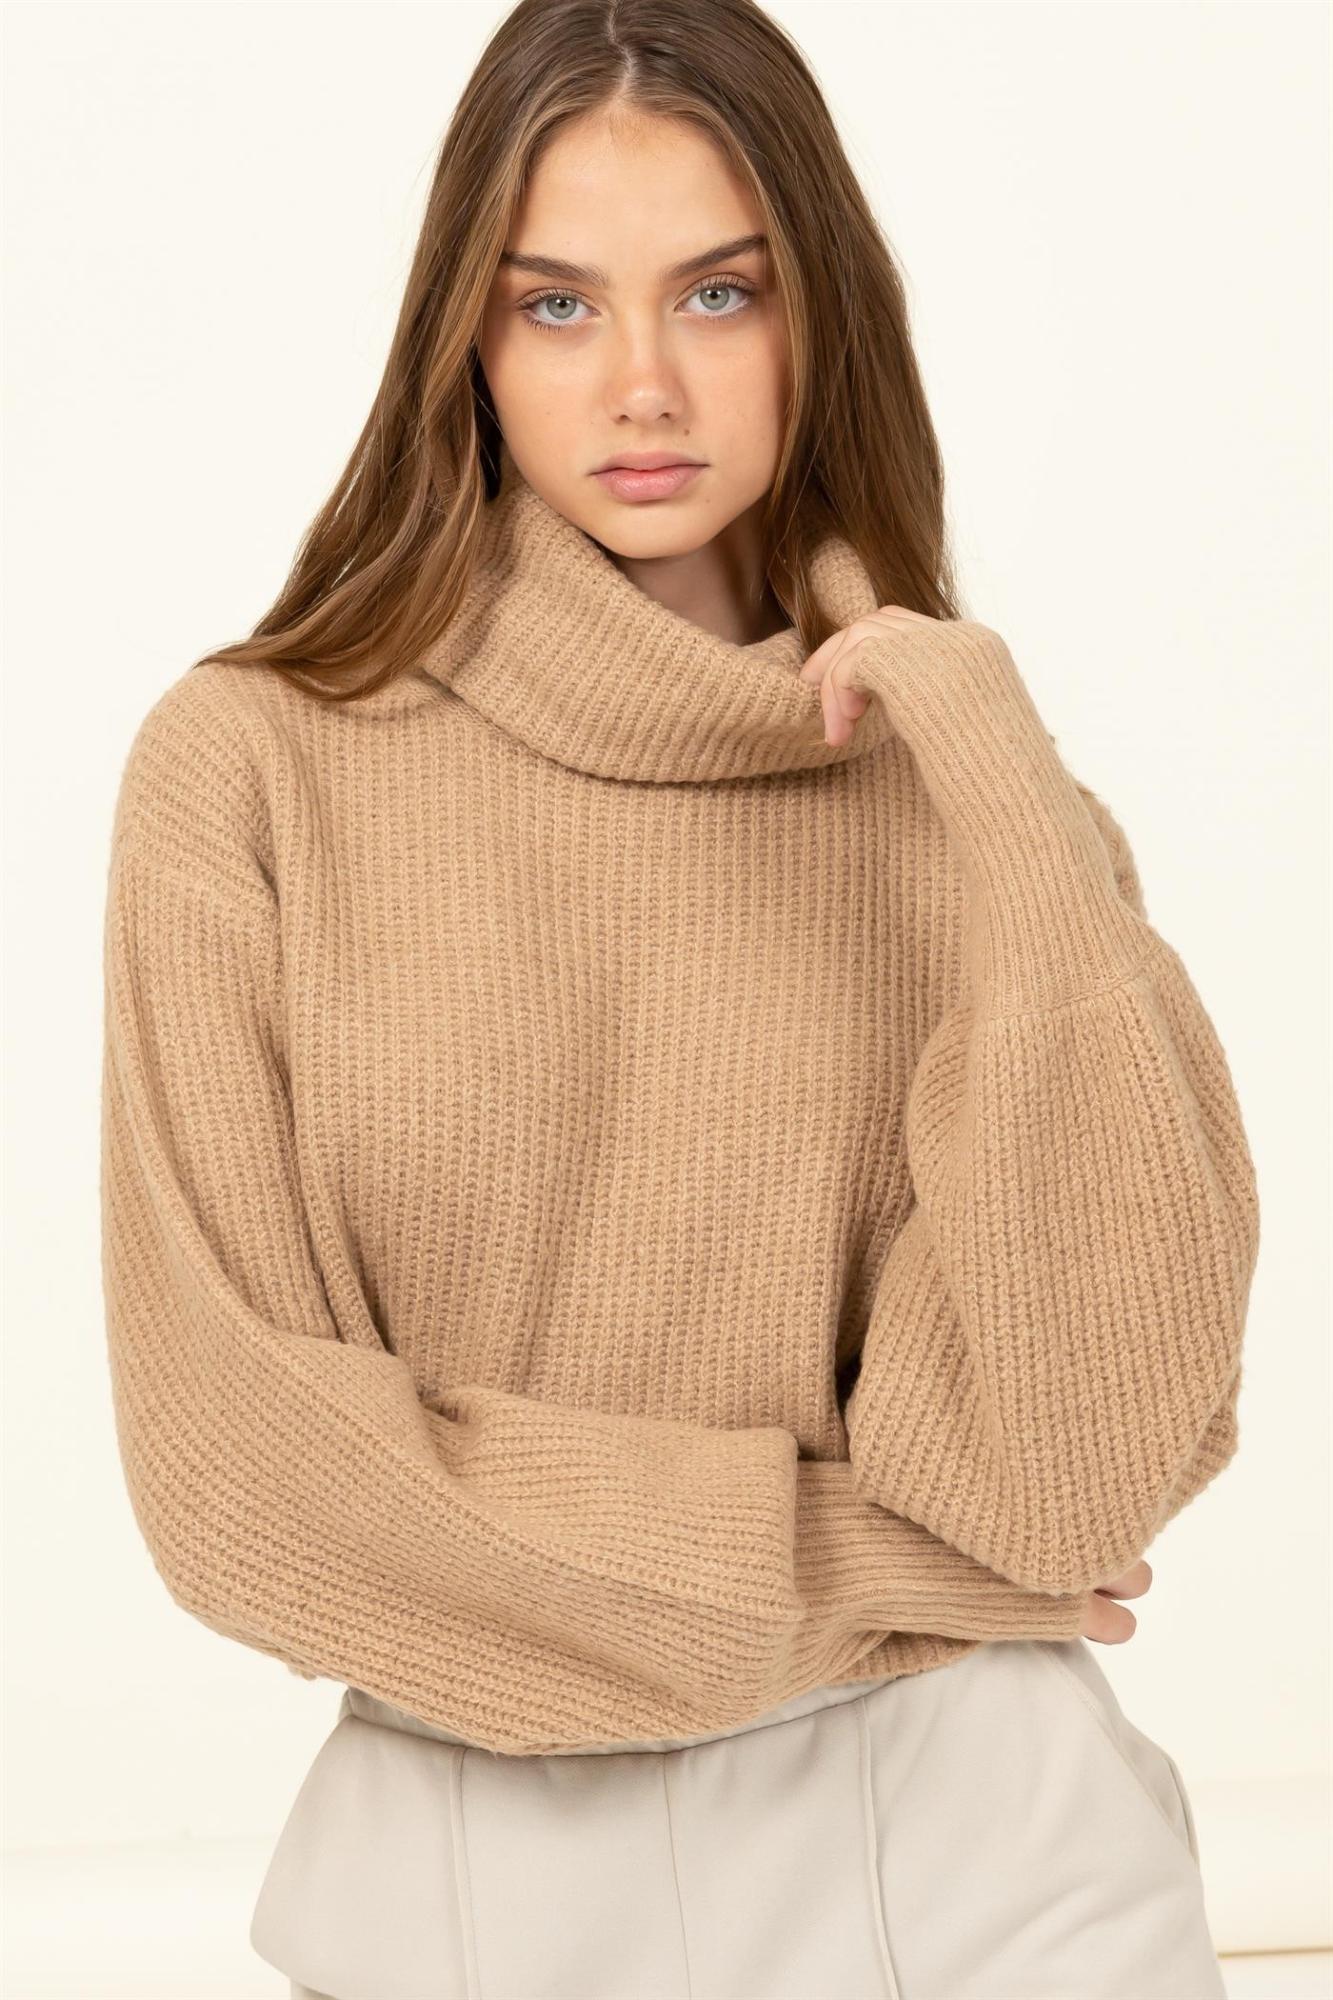 Main One Cropped Turtle Neck Sweater